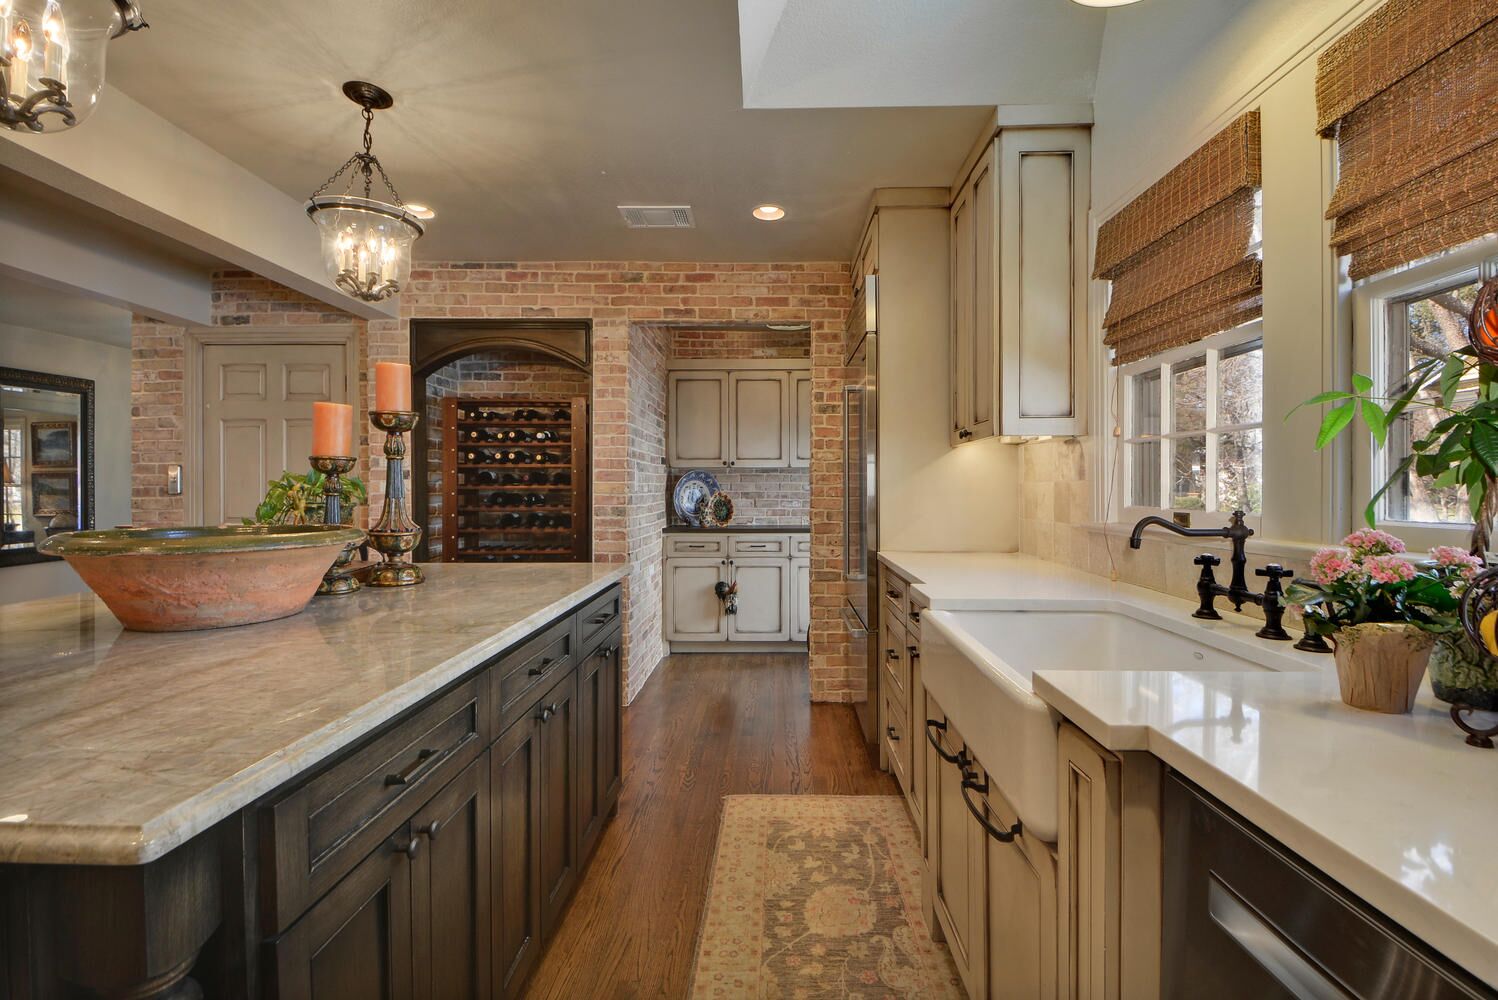 Multi-color kitchen cabinets with cabinet pull handles in center island